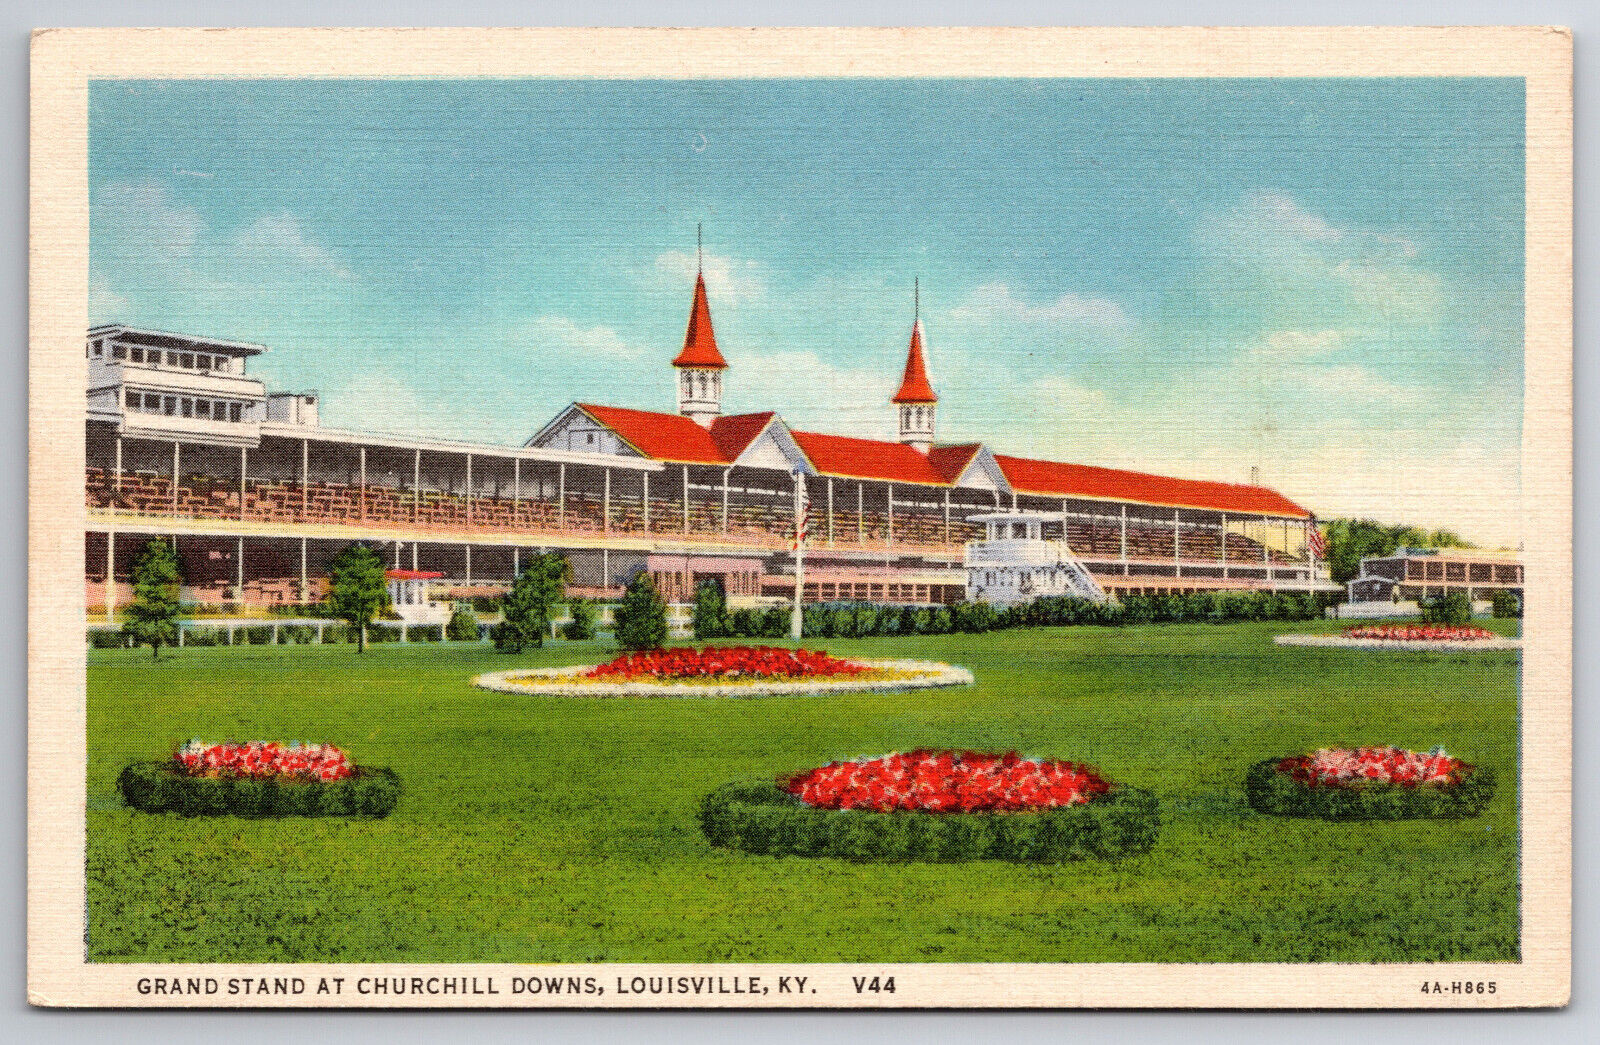 Vintage C1935 Postcard Grand Stand at Churchill Downs, Louisville, KY